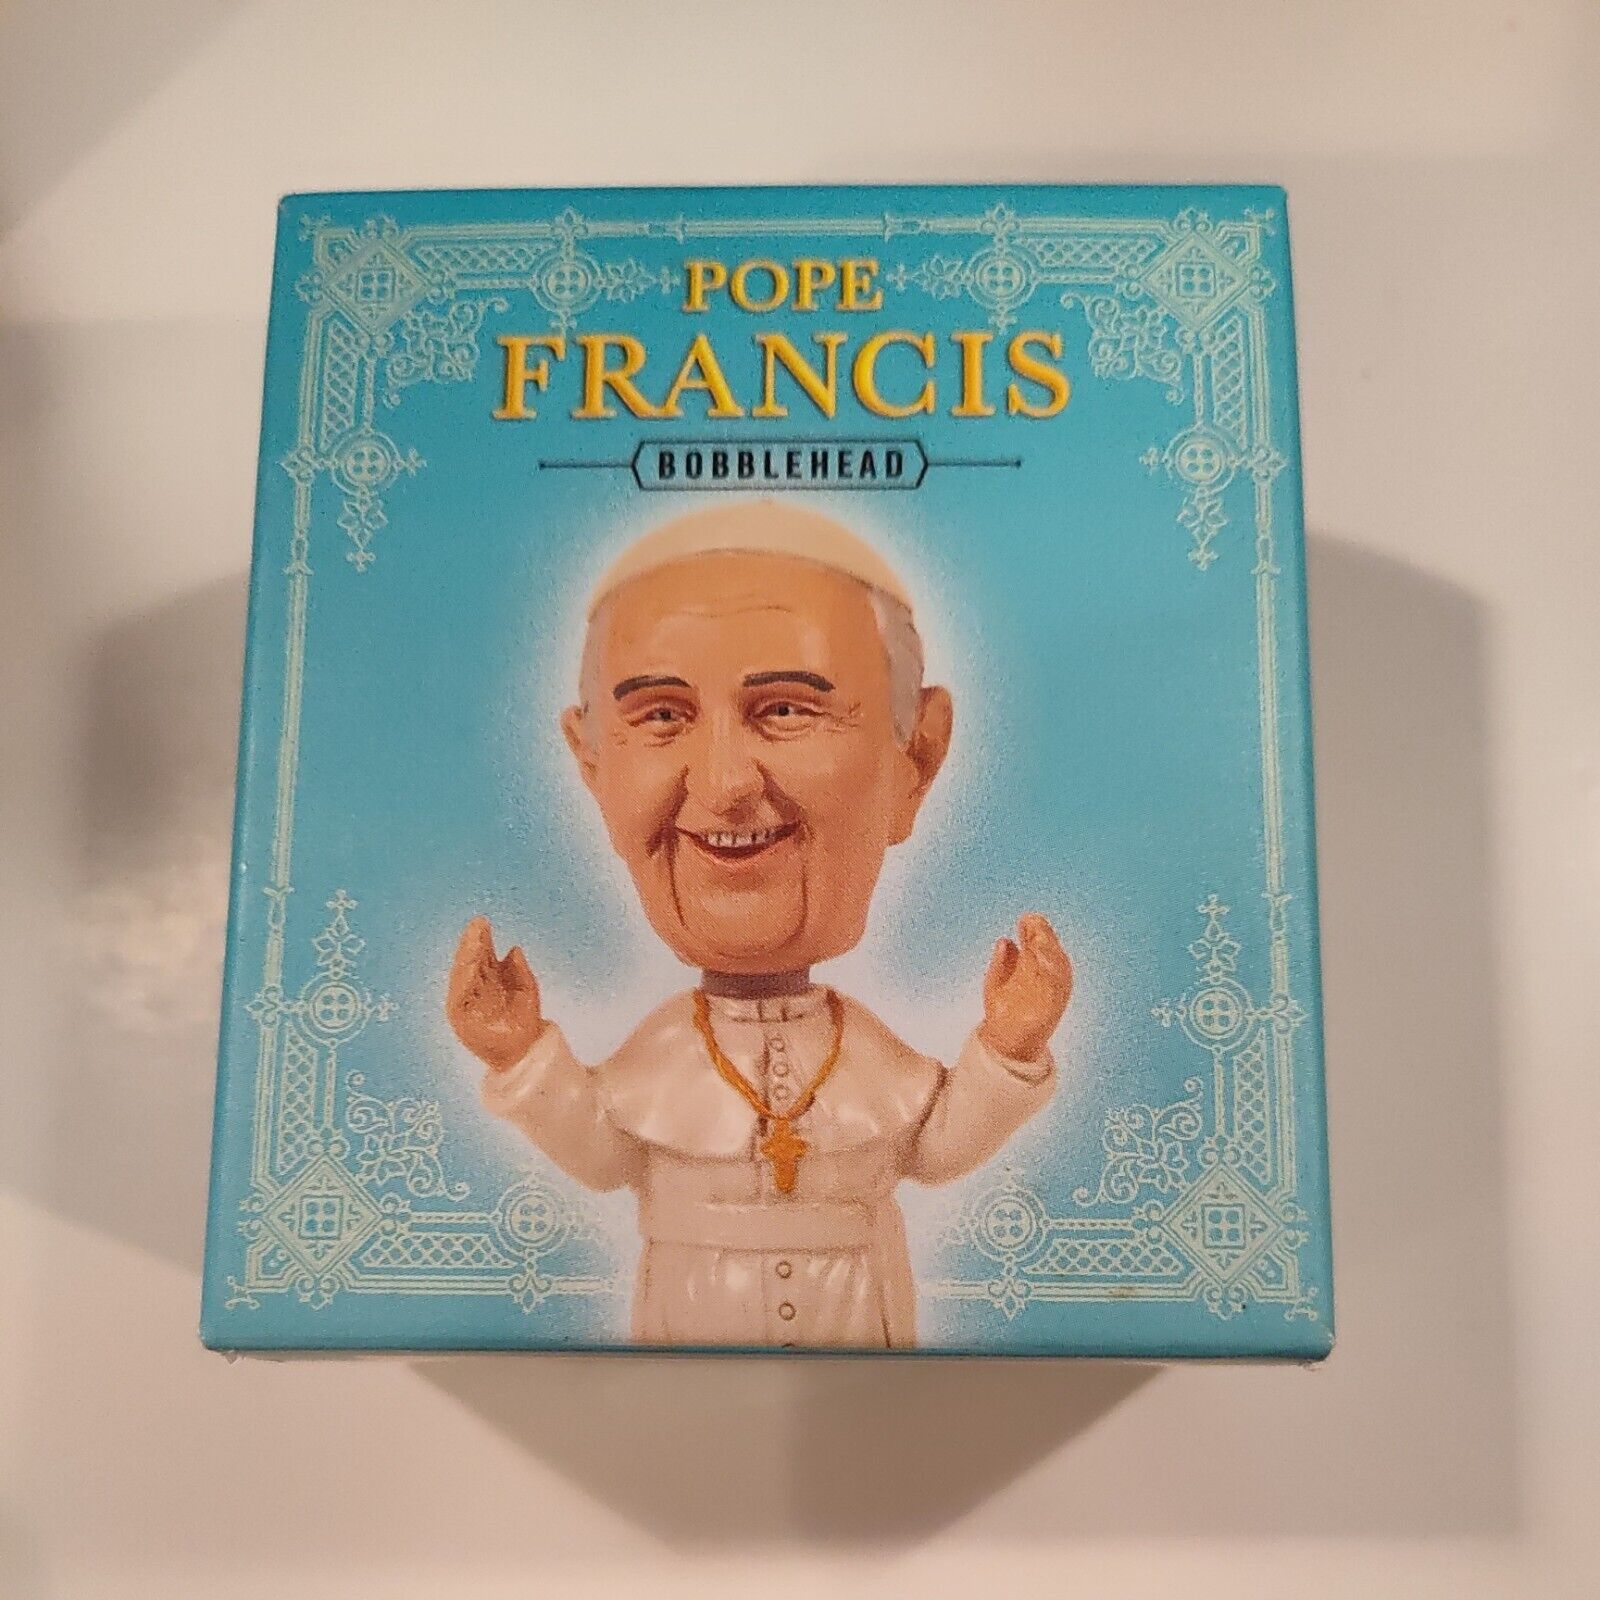 Pope Francis Bobblehead - New In Box